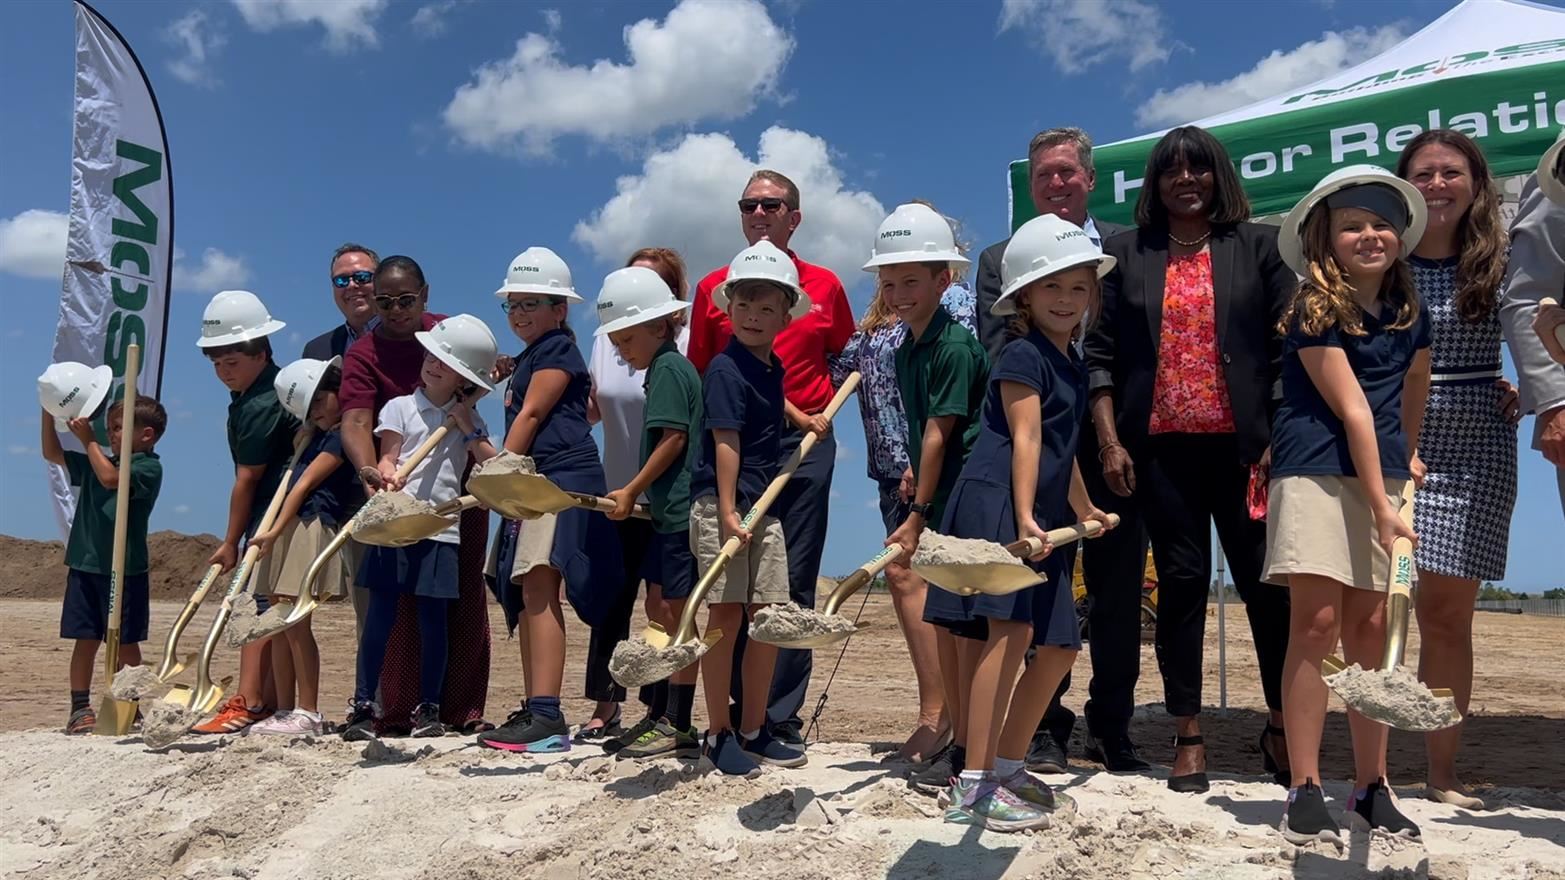  Students and staff breaking ground at new west area school in palm beach